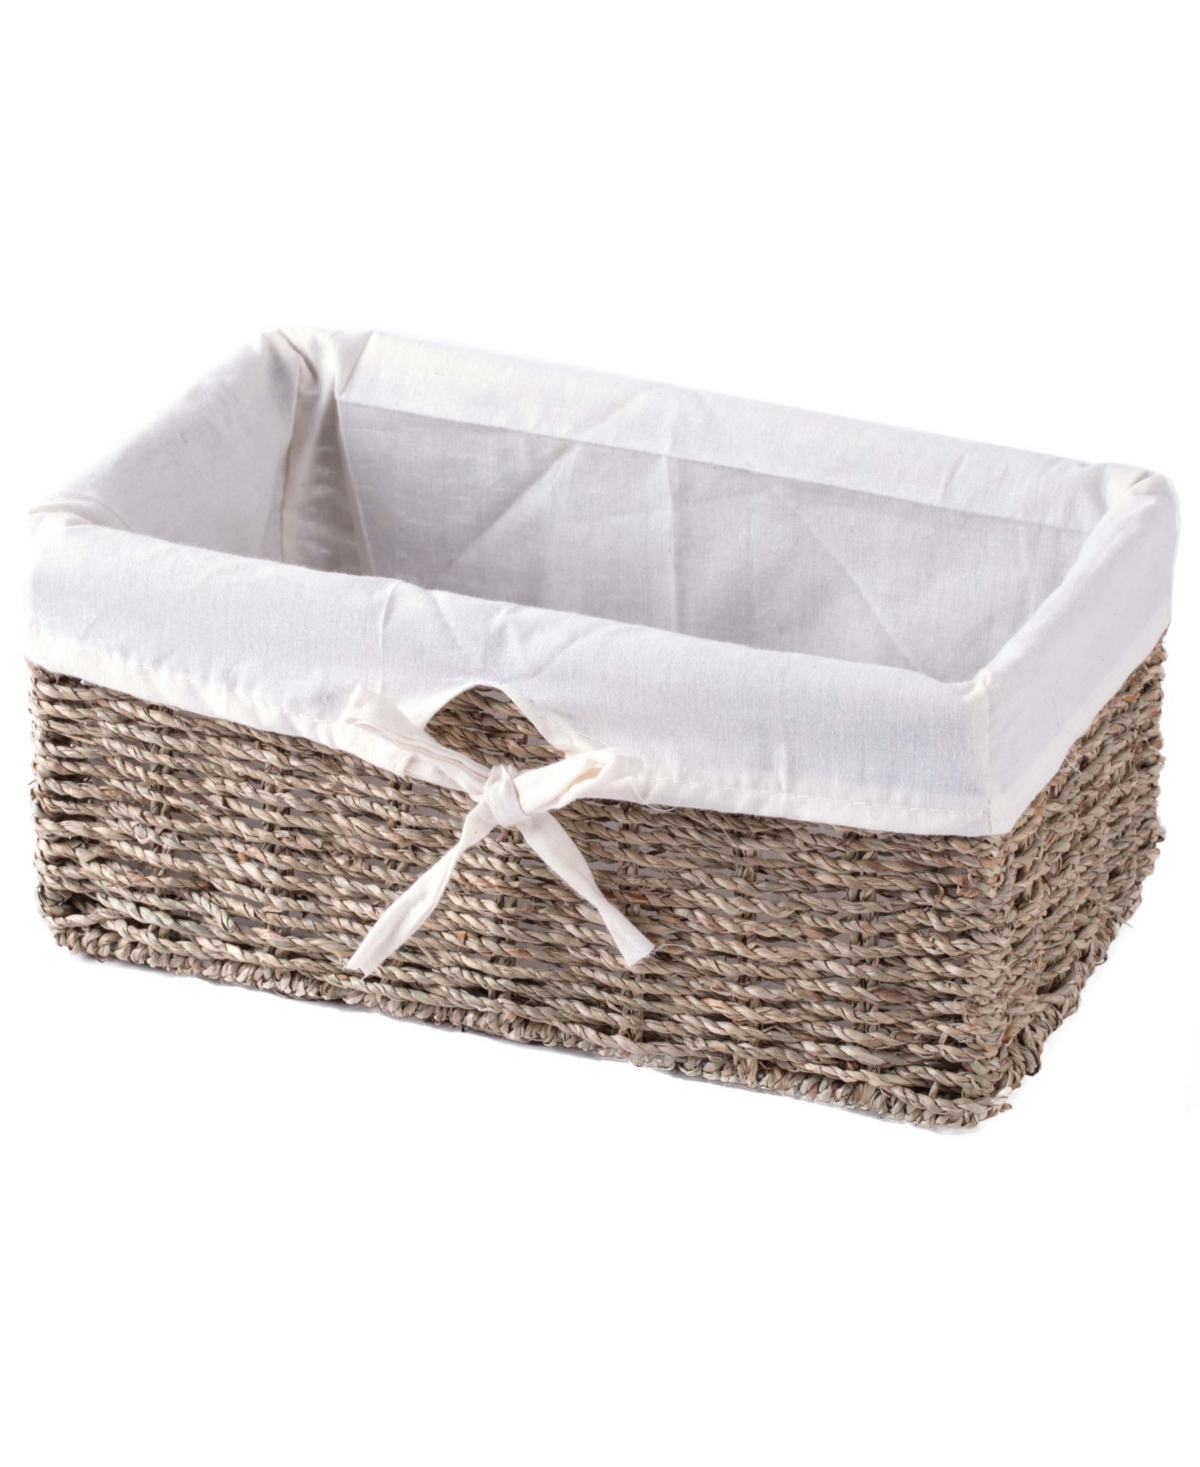 Seagrass Shelf Basket Lined with Lining - Brown